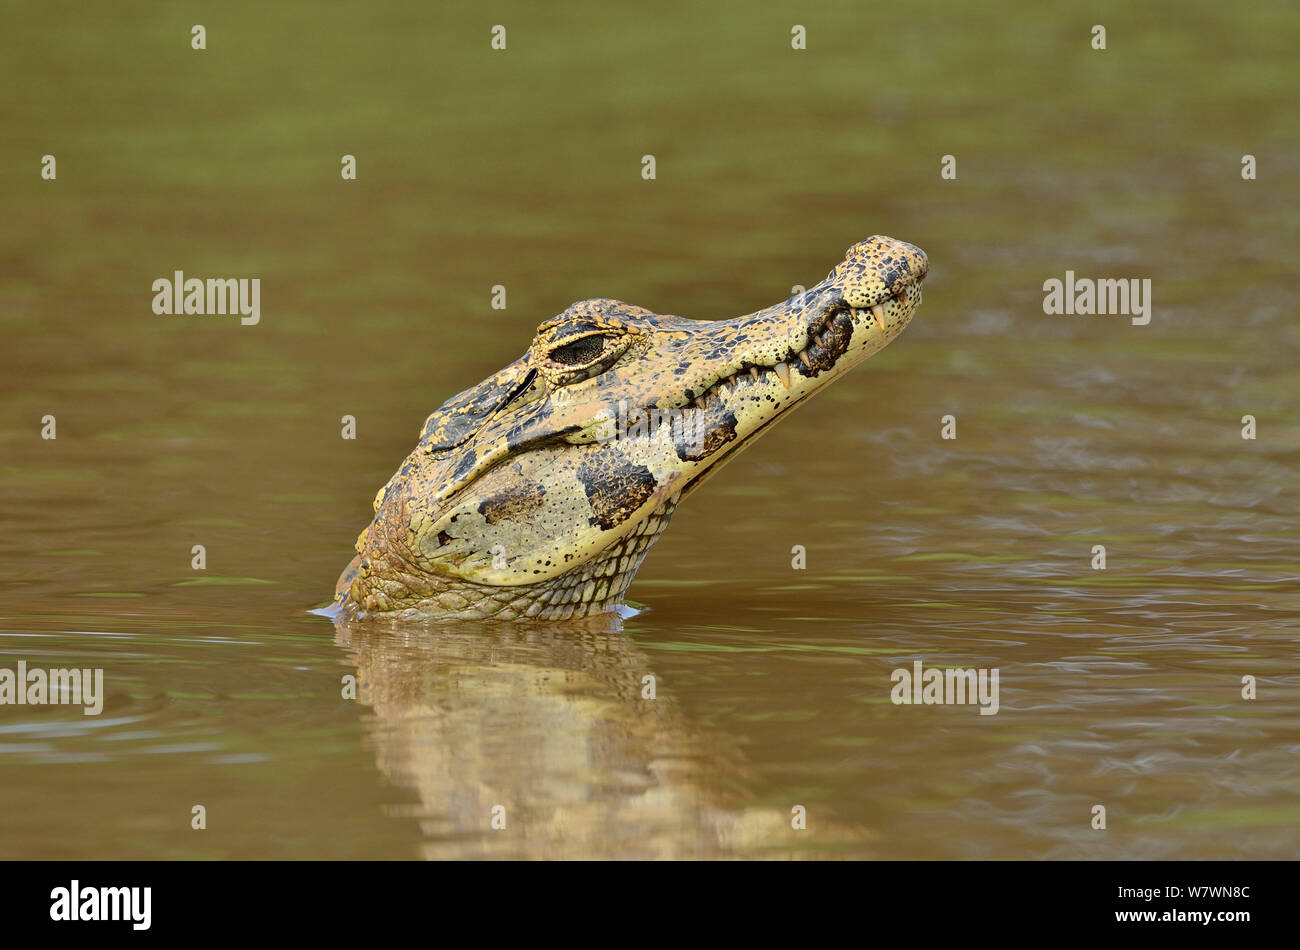 Yacare Caiman (Caiman yacare) peering out of the Piquiri River, Pantanal of Mato Grosso, Mato Grosso State, Western Brazil. Stock Photo